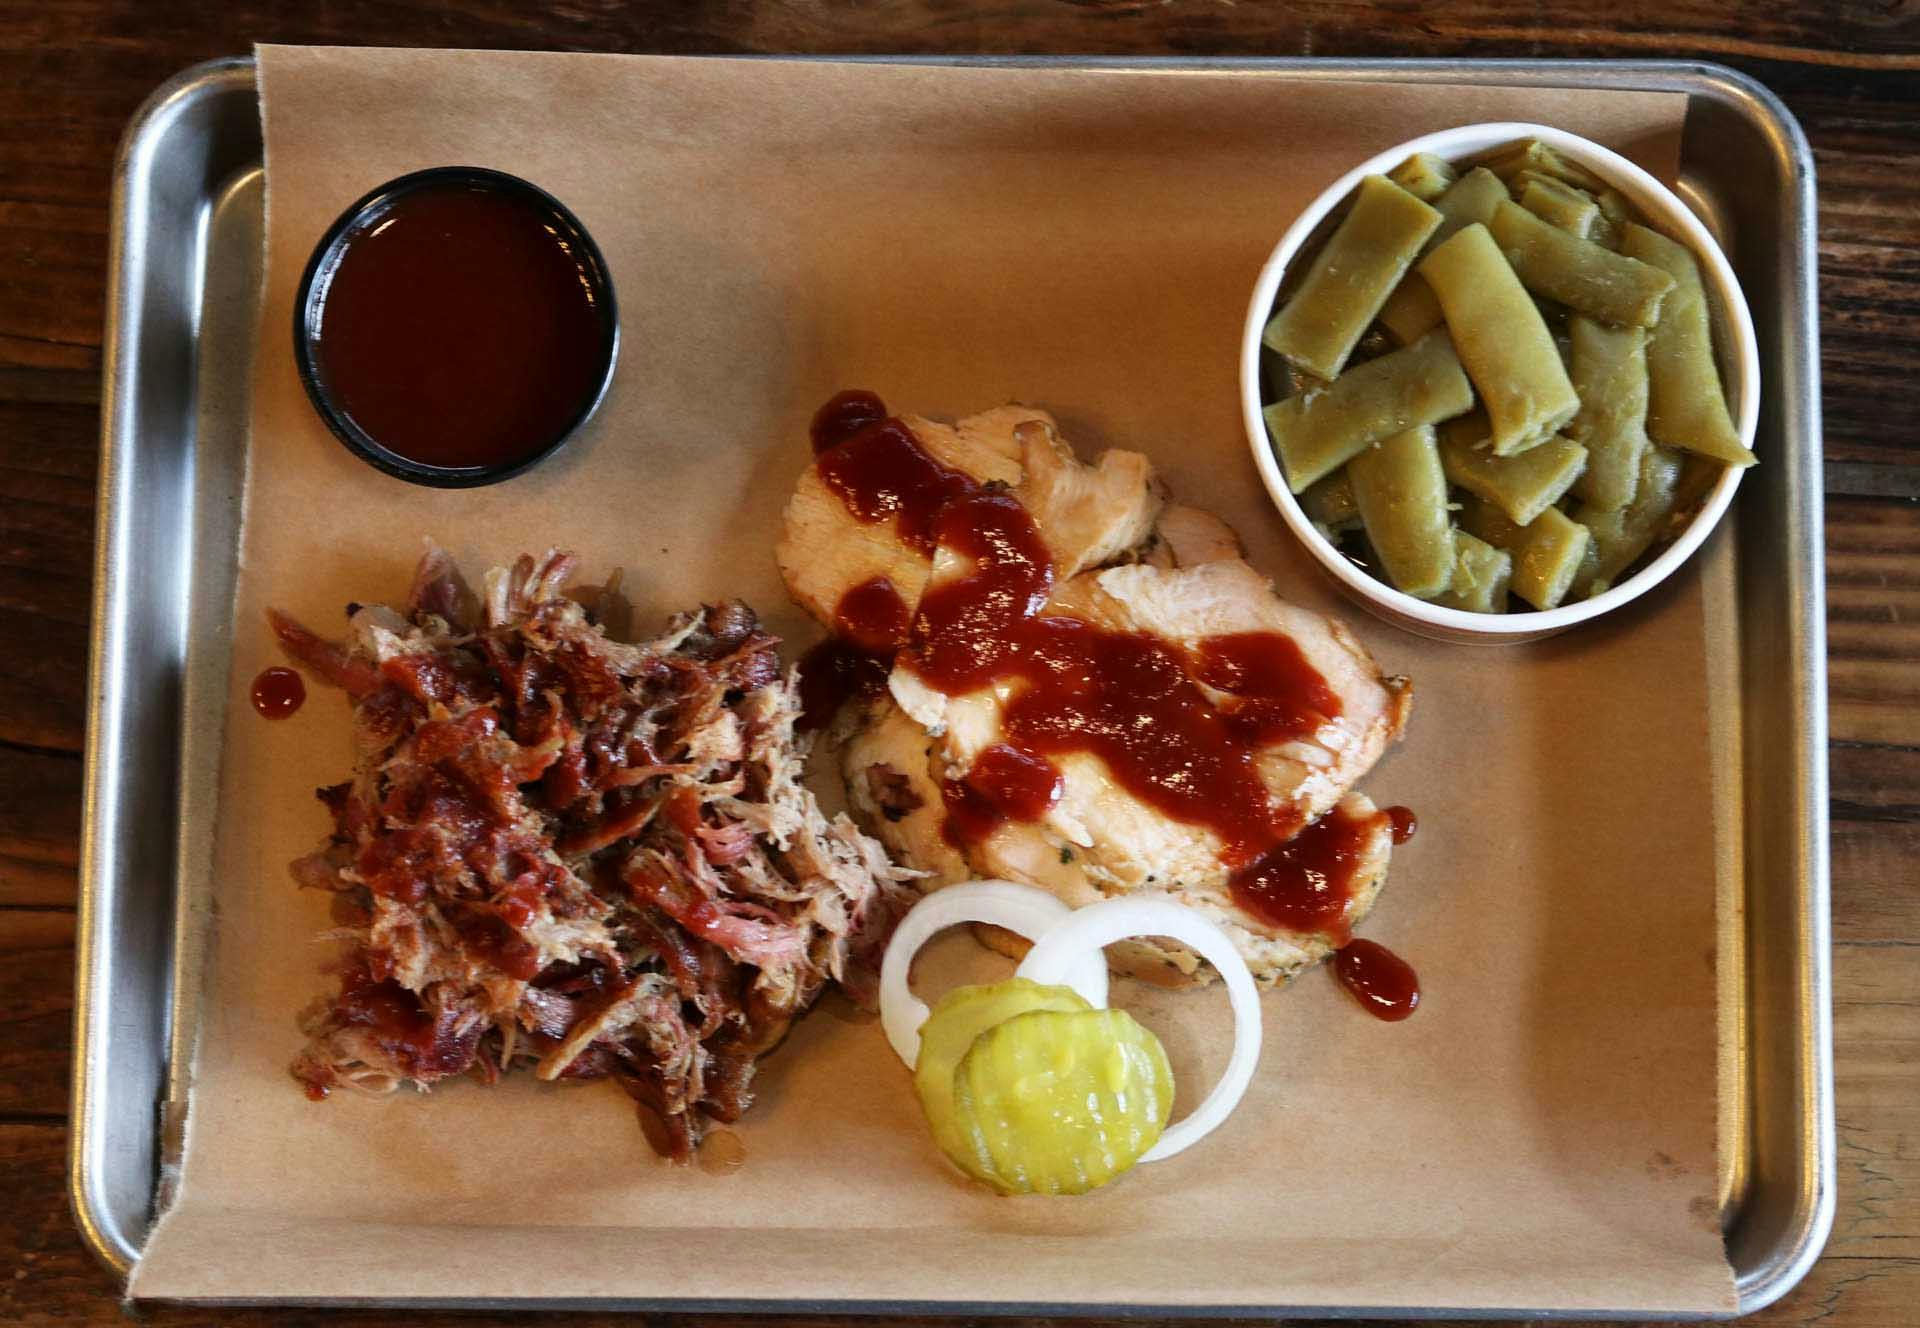 First Dickey’s Barbecue Pit in San Diego Opens with Three Day Grand Opening